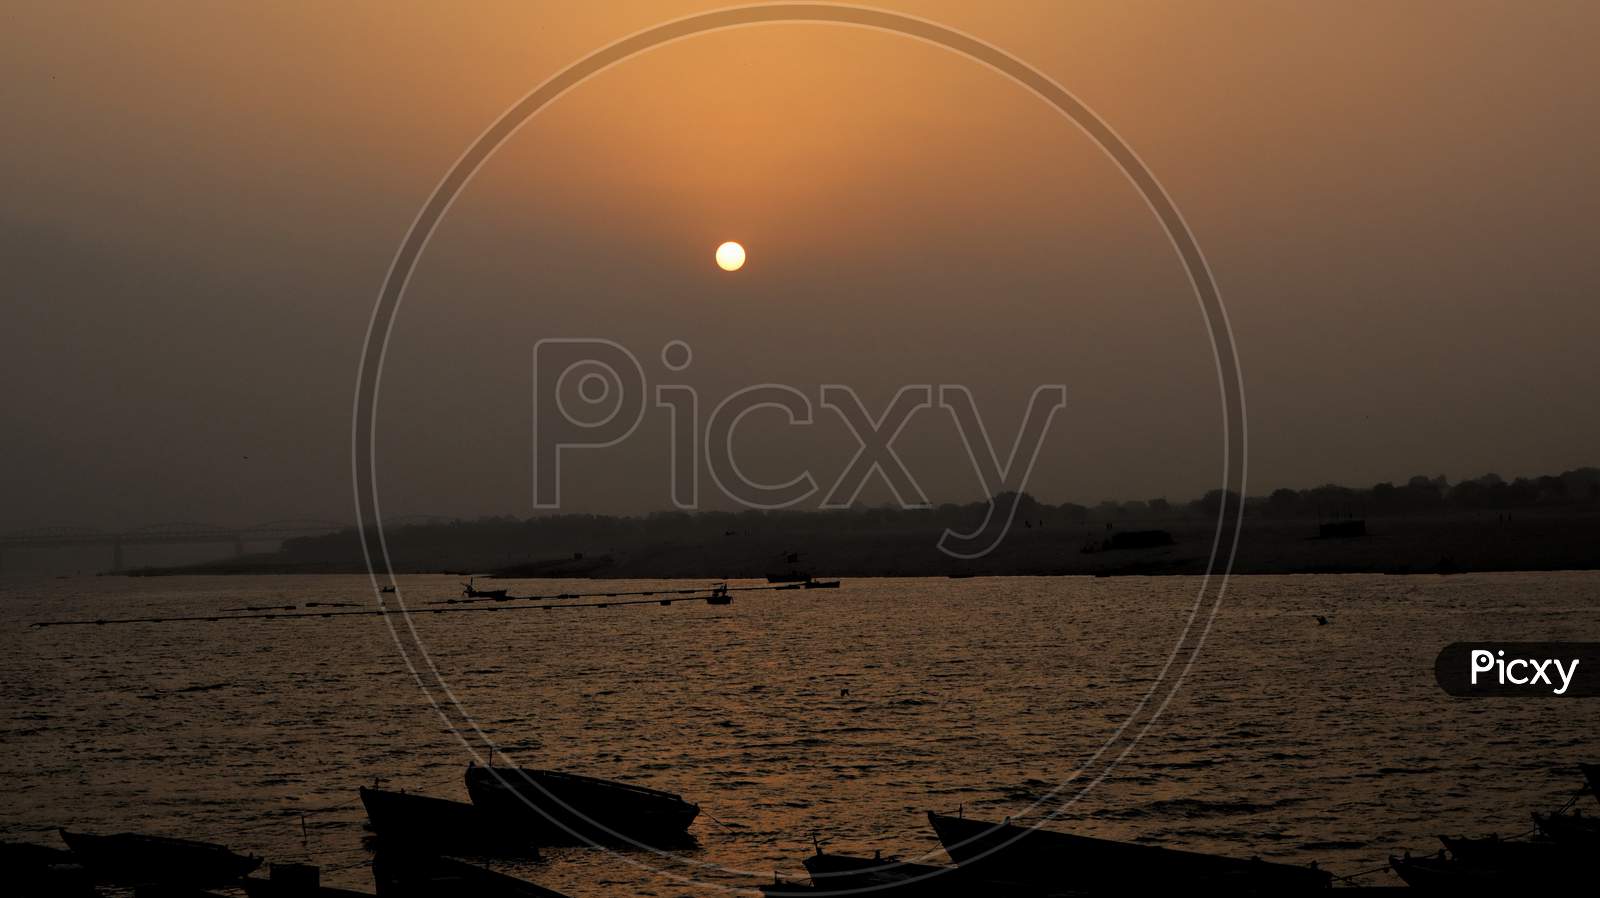 Landscape view of the ghats of Varanasi, at the bank of river Ganges with selective focus.